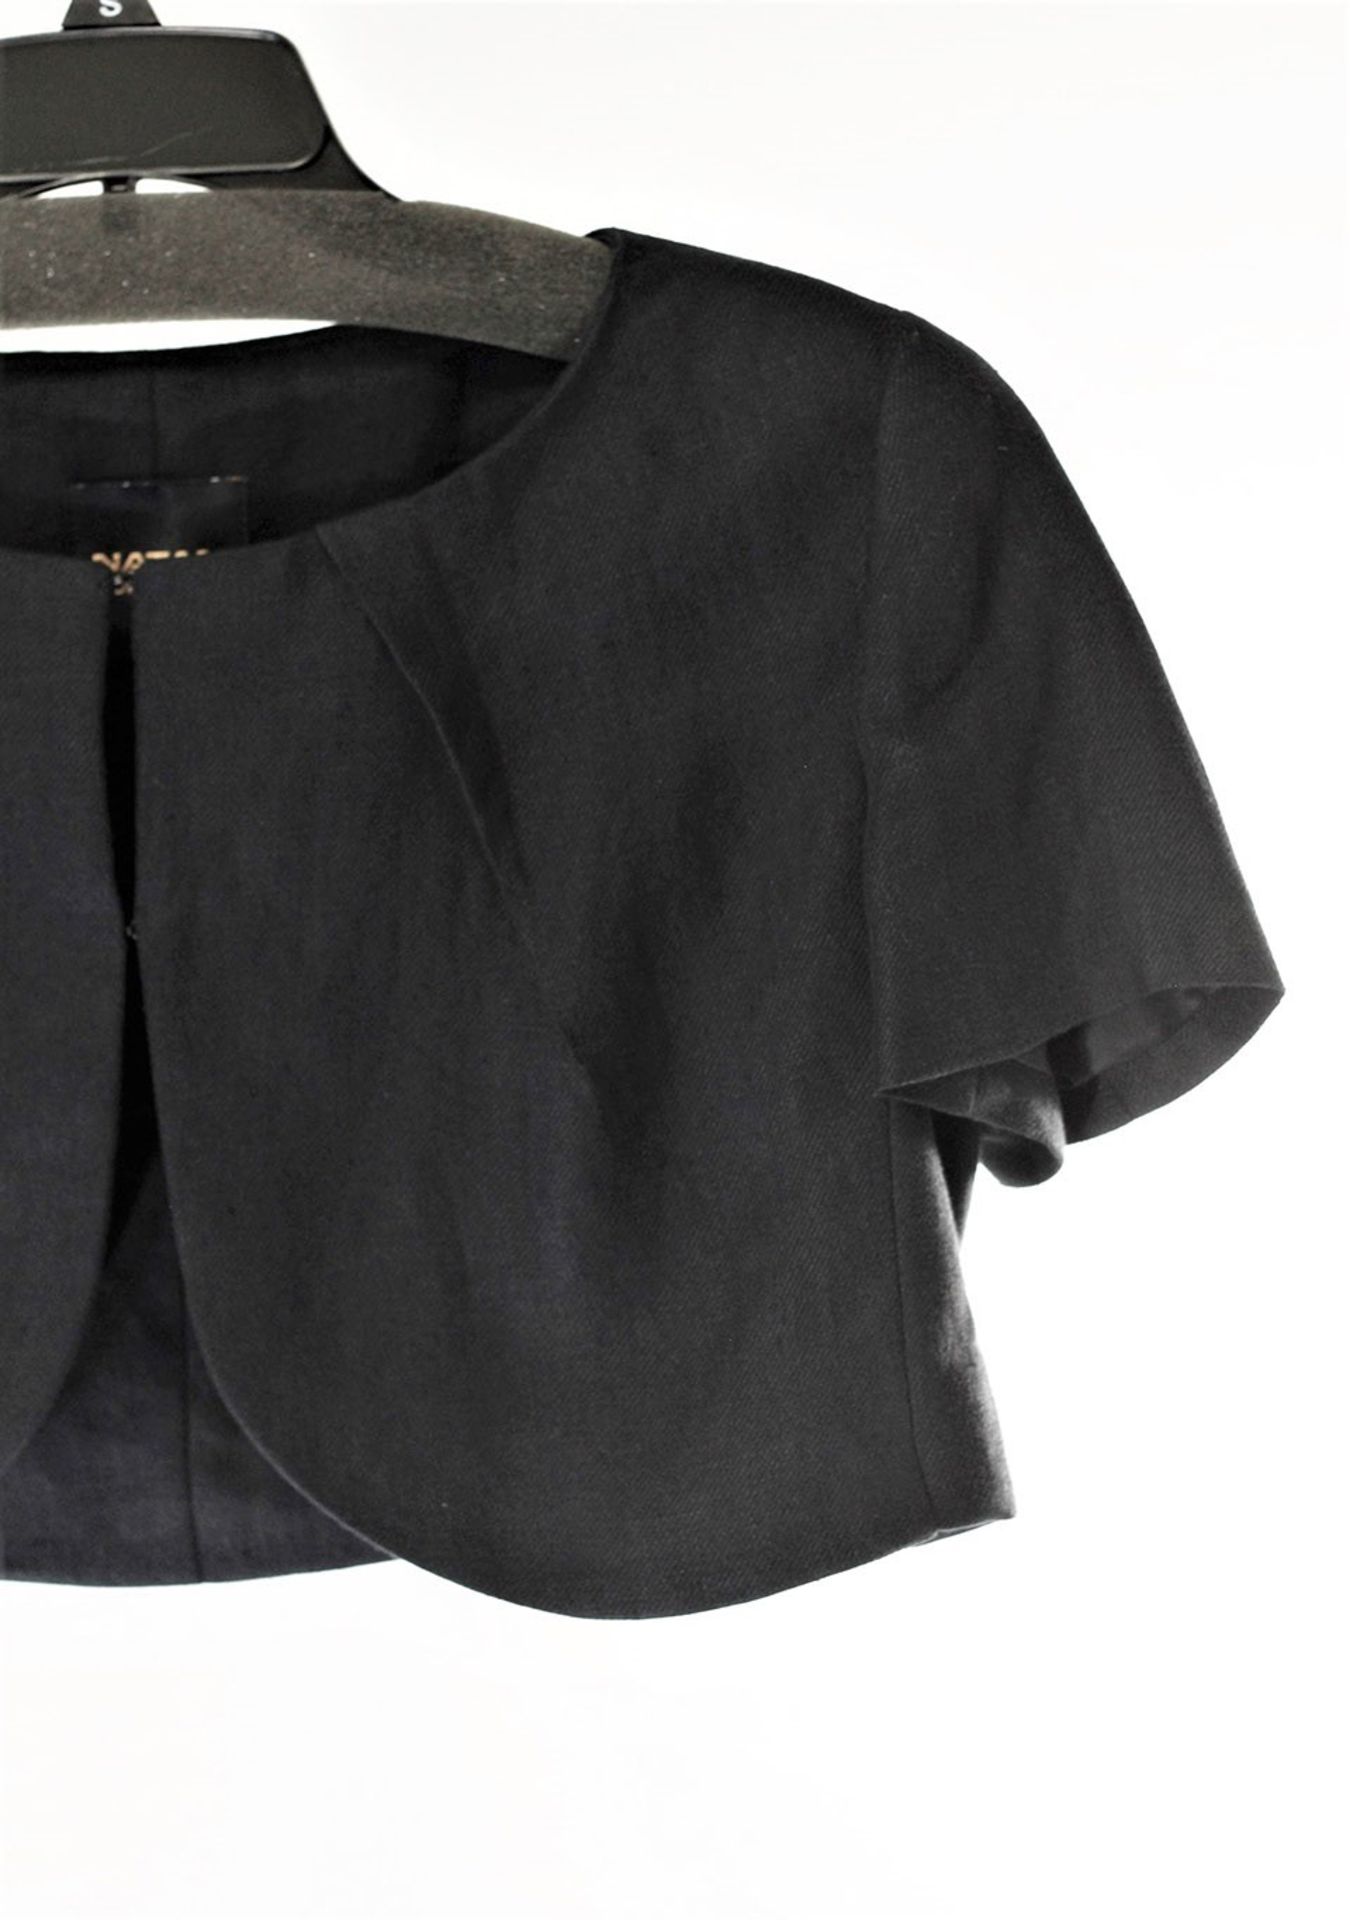 1 x Natan Black Bolero - Size: 10 - Material: 100% Linen - From a High End Clothing Boutique In - Image 4 of 10